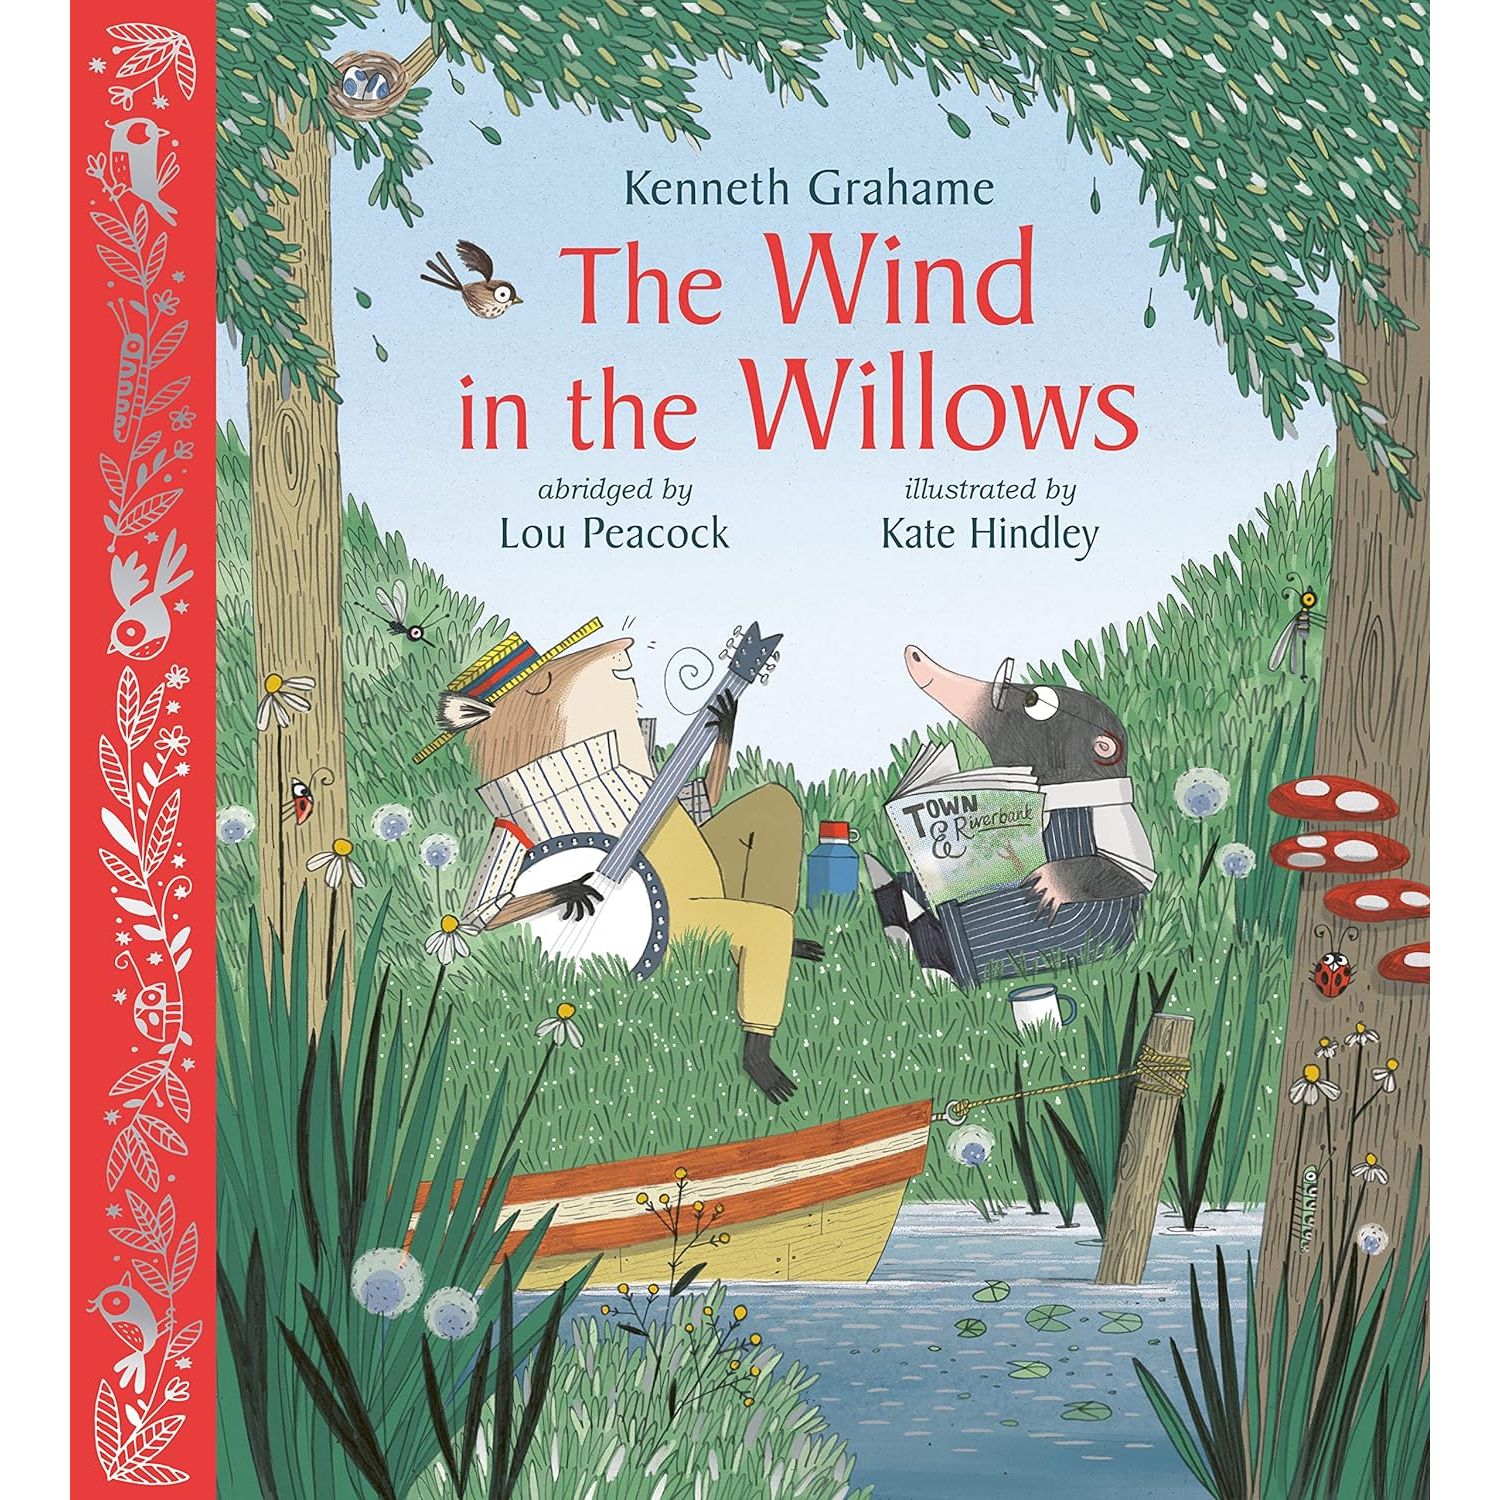 The Wind in the Willows - Kenneth Grahame - Abridged by Lou Peacock